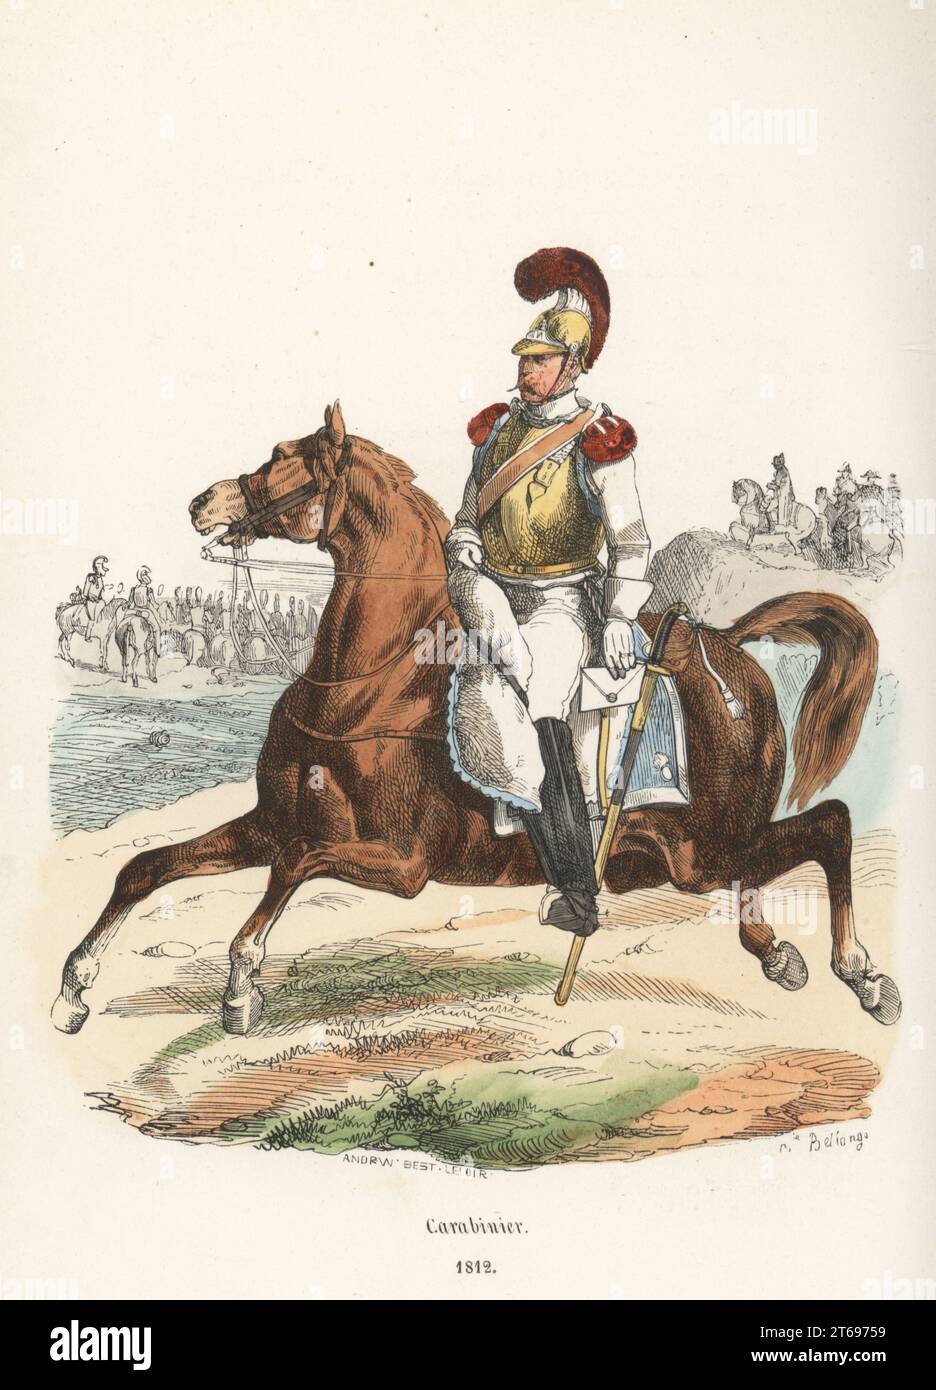 French Horse Carabinier carrying a letter, 1812. In brass helmet with crest or chenille, brass cuirass, white coat and breeches, red epaulettes, boots. Armed with straight sword. Mouton shabrack. 2nd Carabiniers regiment. Handcoloured woodcut by Andrew Best Leloir after an illustration by Hippolyte Bellangé from P.M. Laurent de lArdeches Histoire de Napoleon, Paris, 1840. Stock Photo